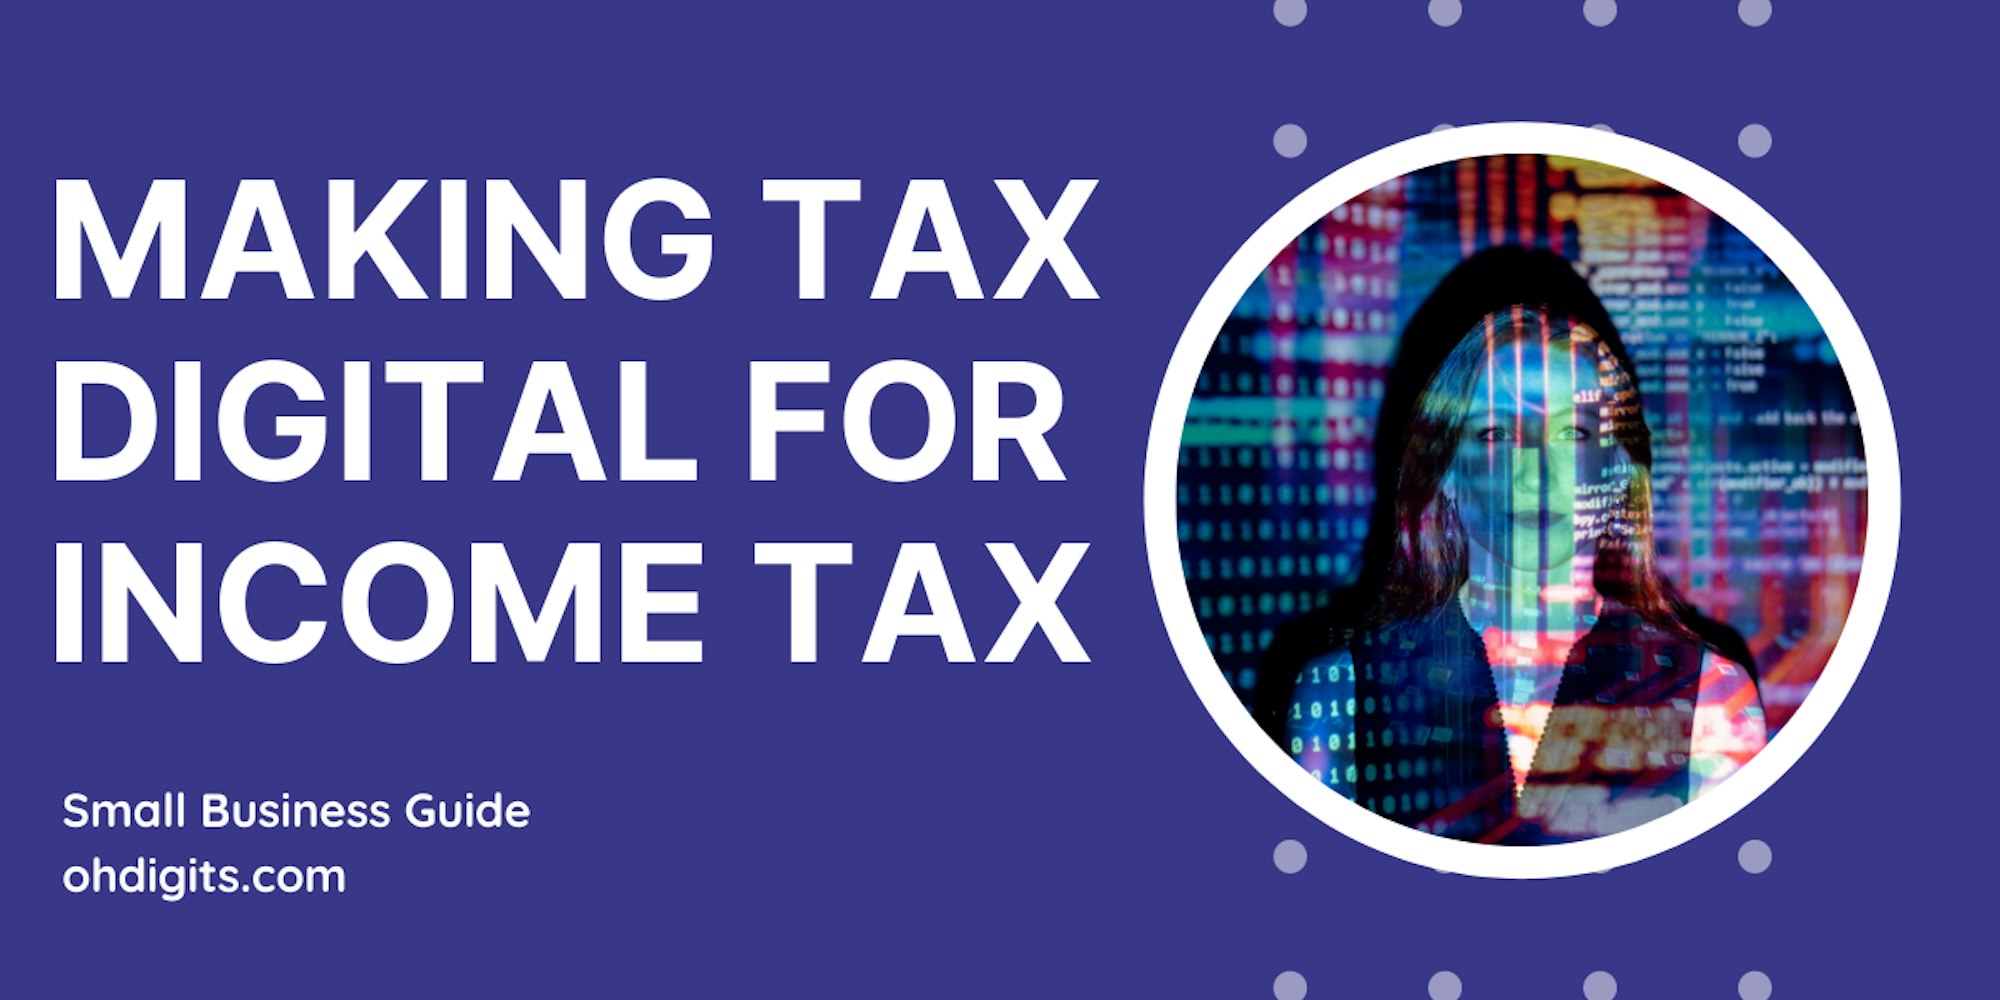 making tax digital for income tax